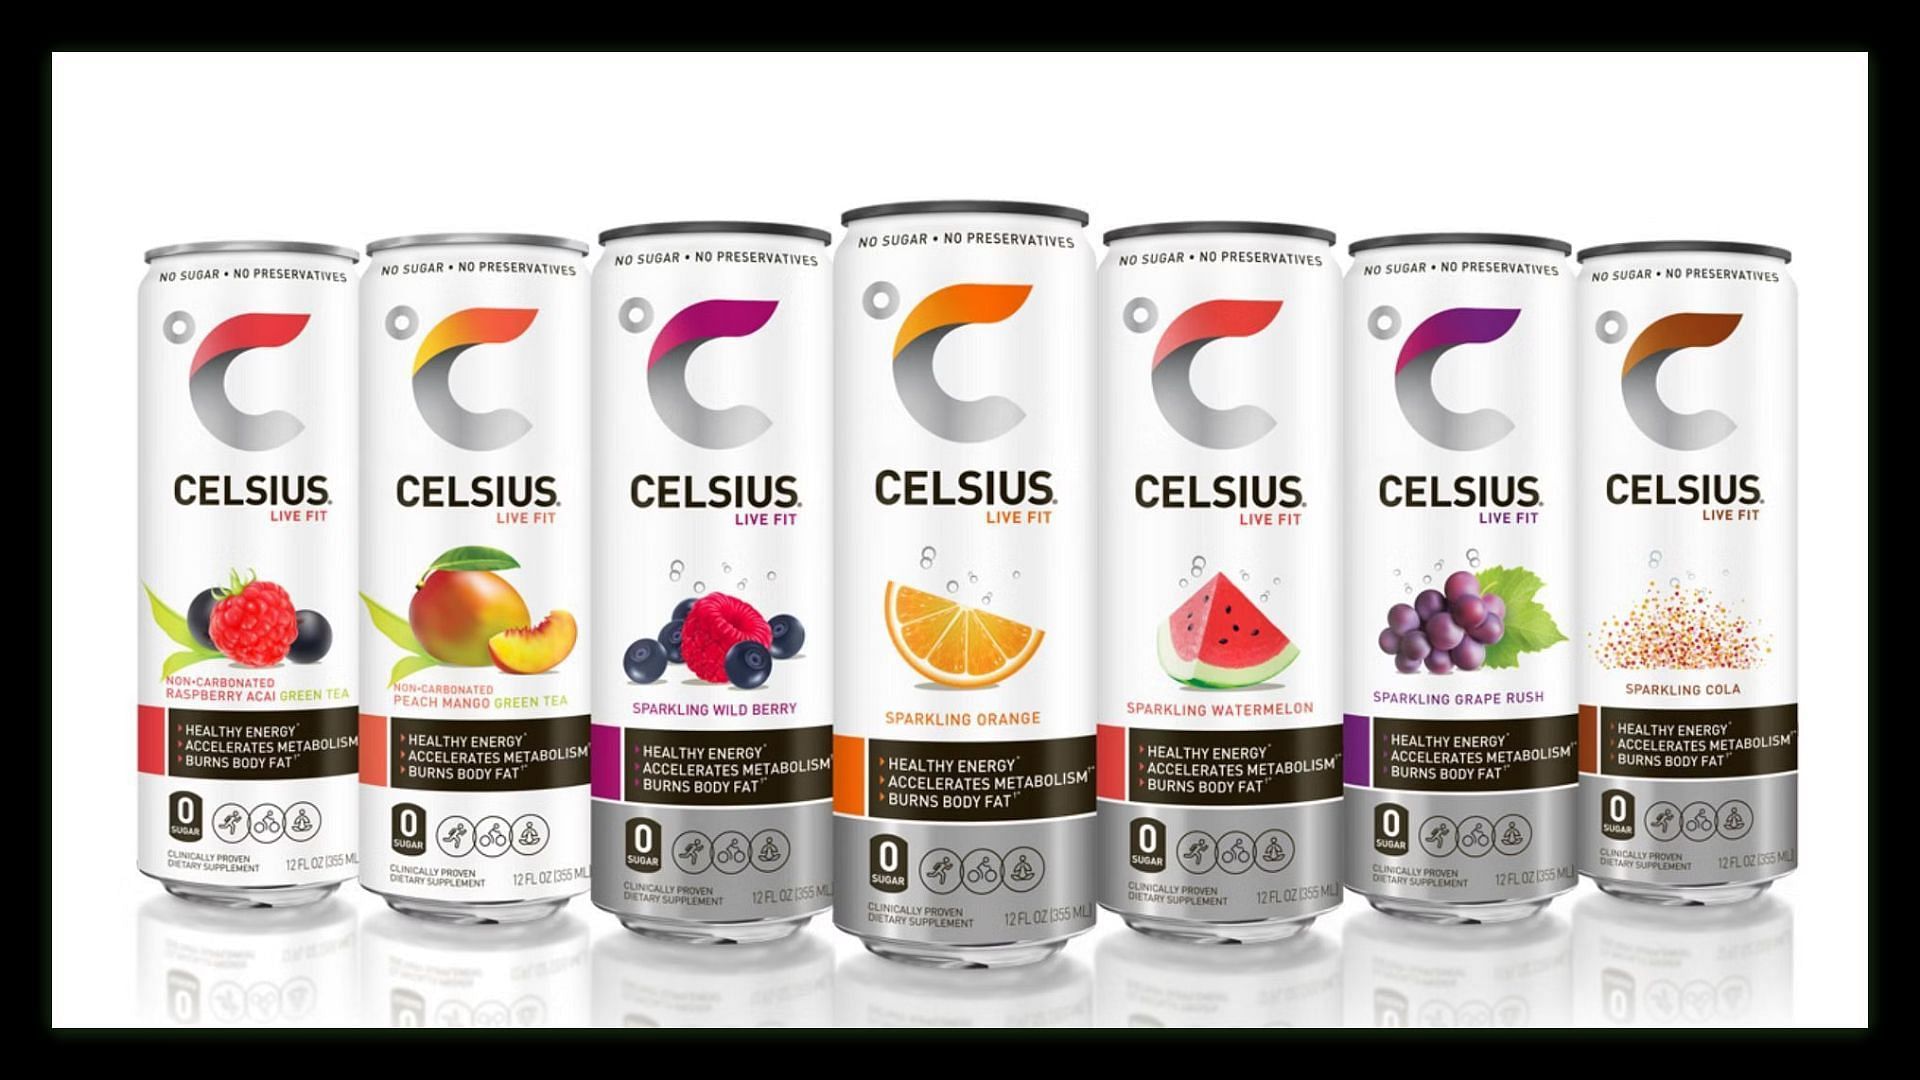 The brand is popular for its energy drinks, sparkling water, and other similar beverages (Image via Celsius)